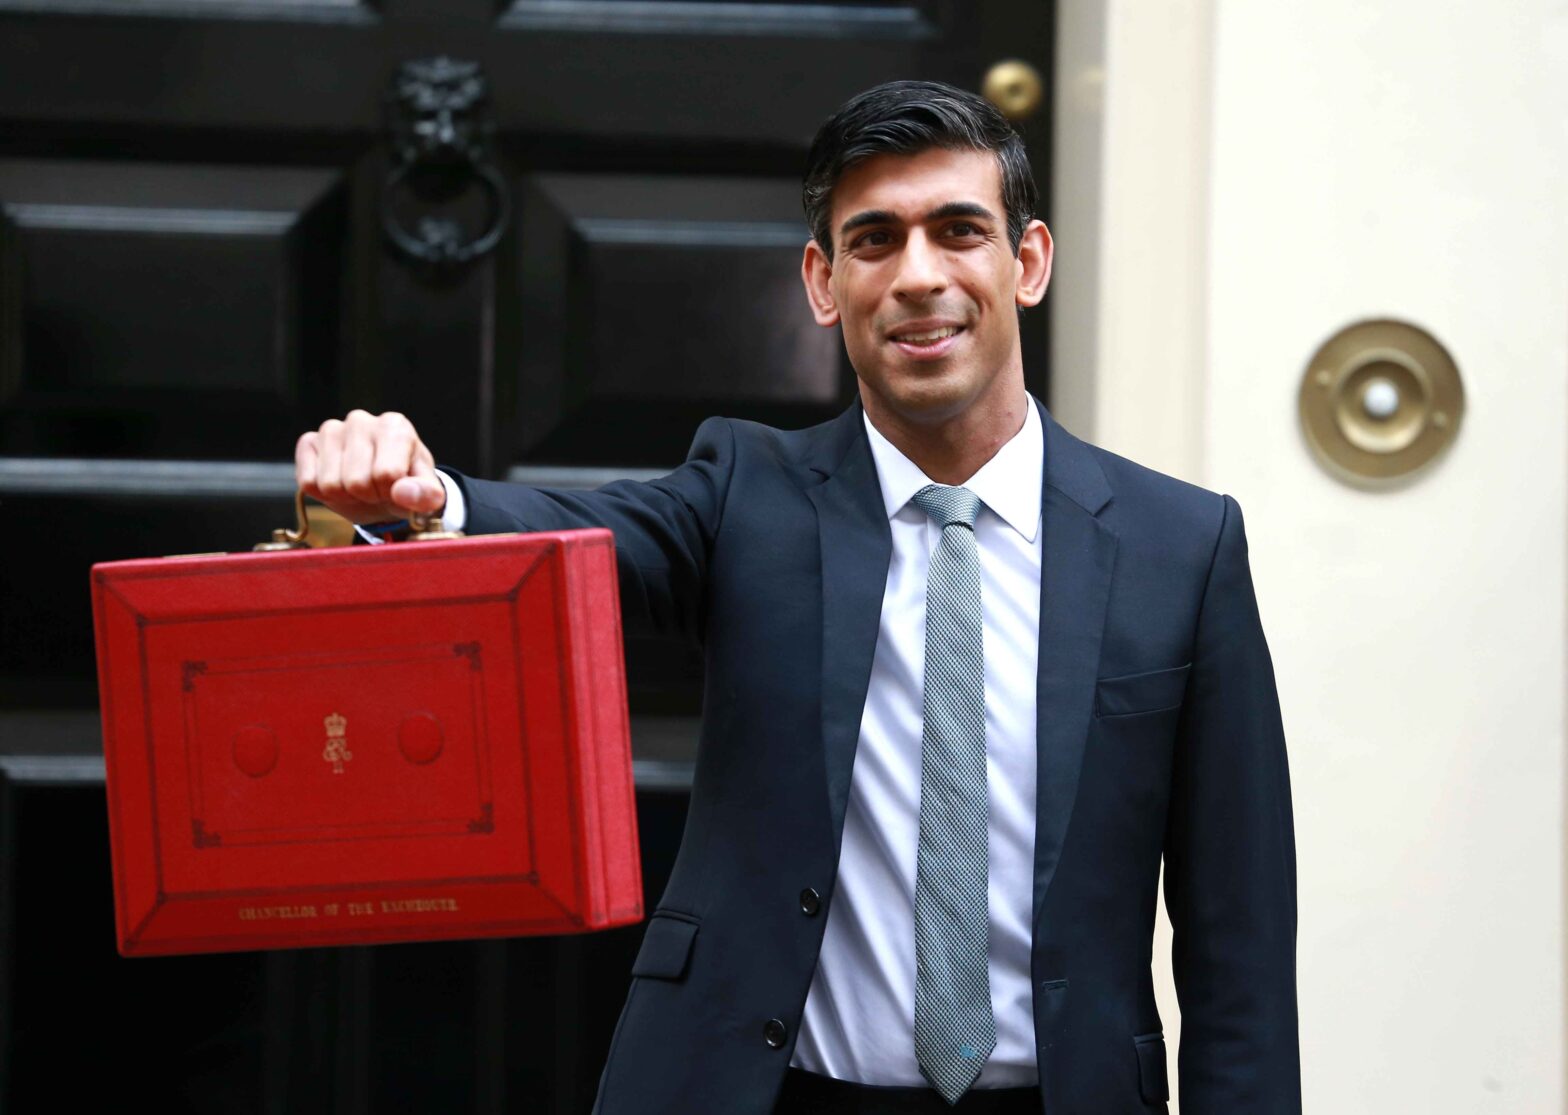 Optimism for crypto as advocate Rishi Sunak becomes UK’s PM